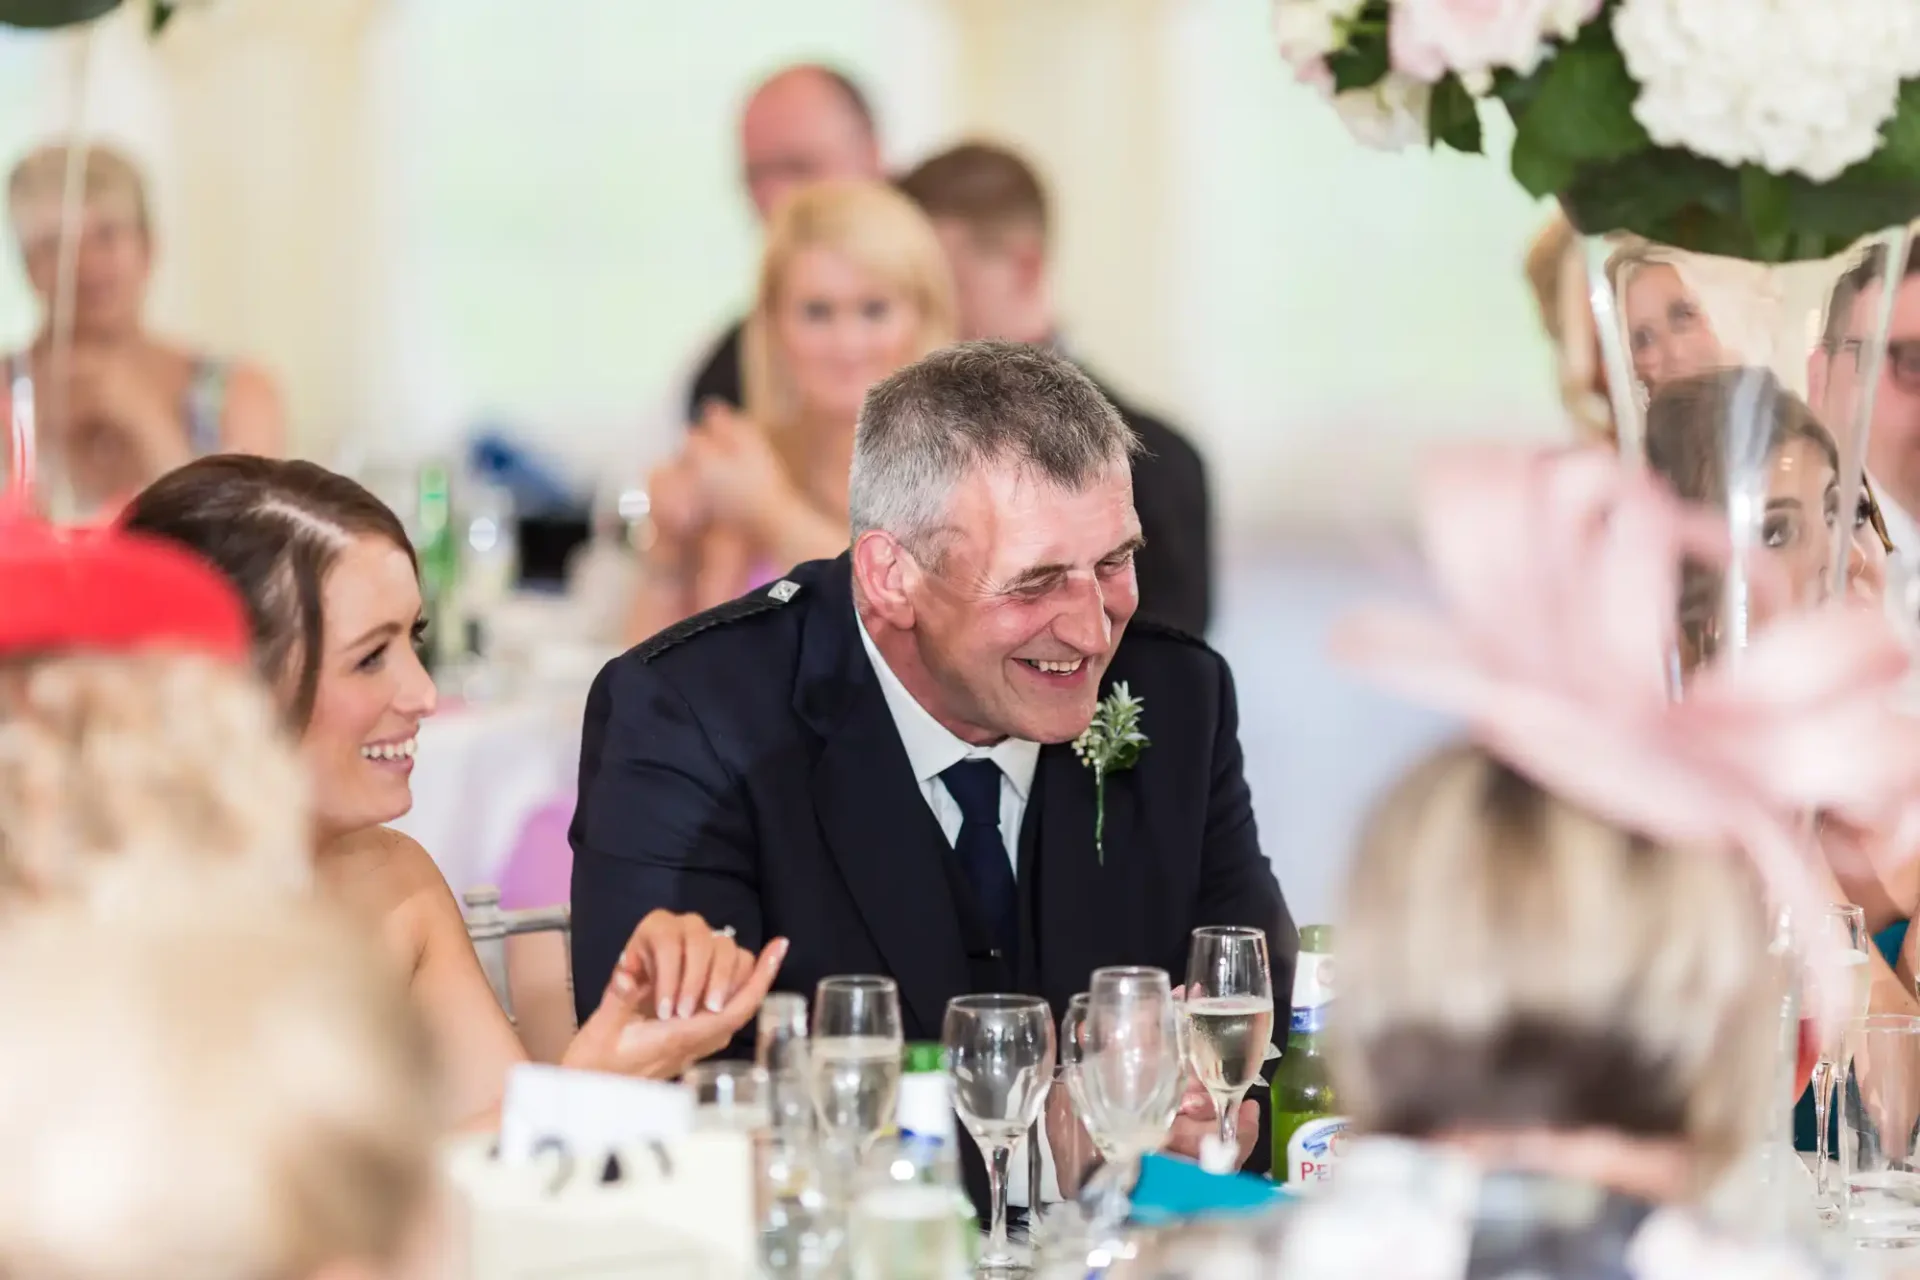 A man in a suit laughing at a decorated table during a wedding reception, surrounded by other guests.